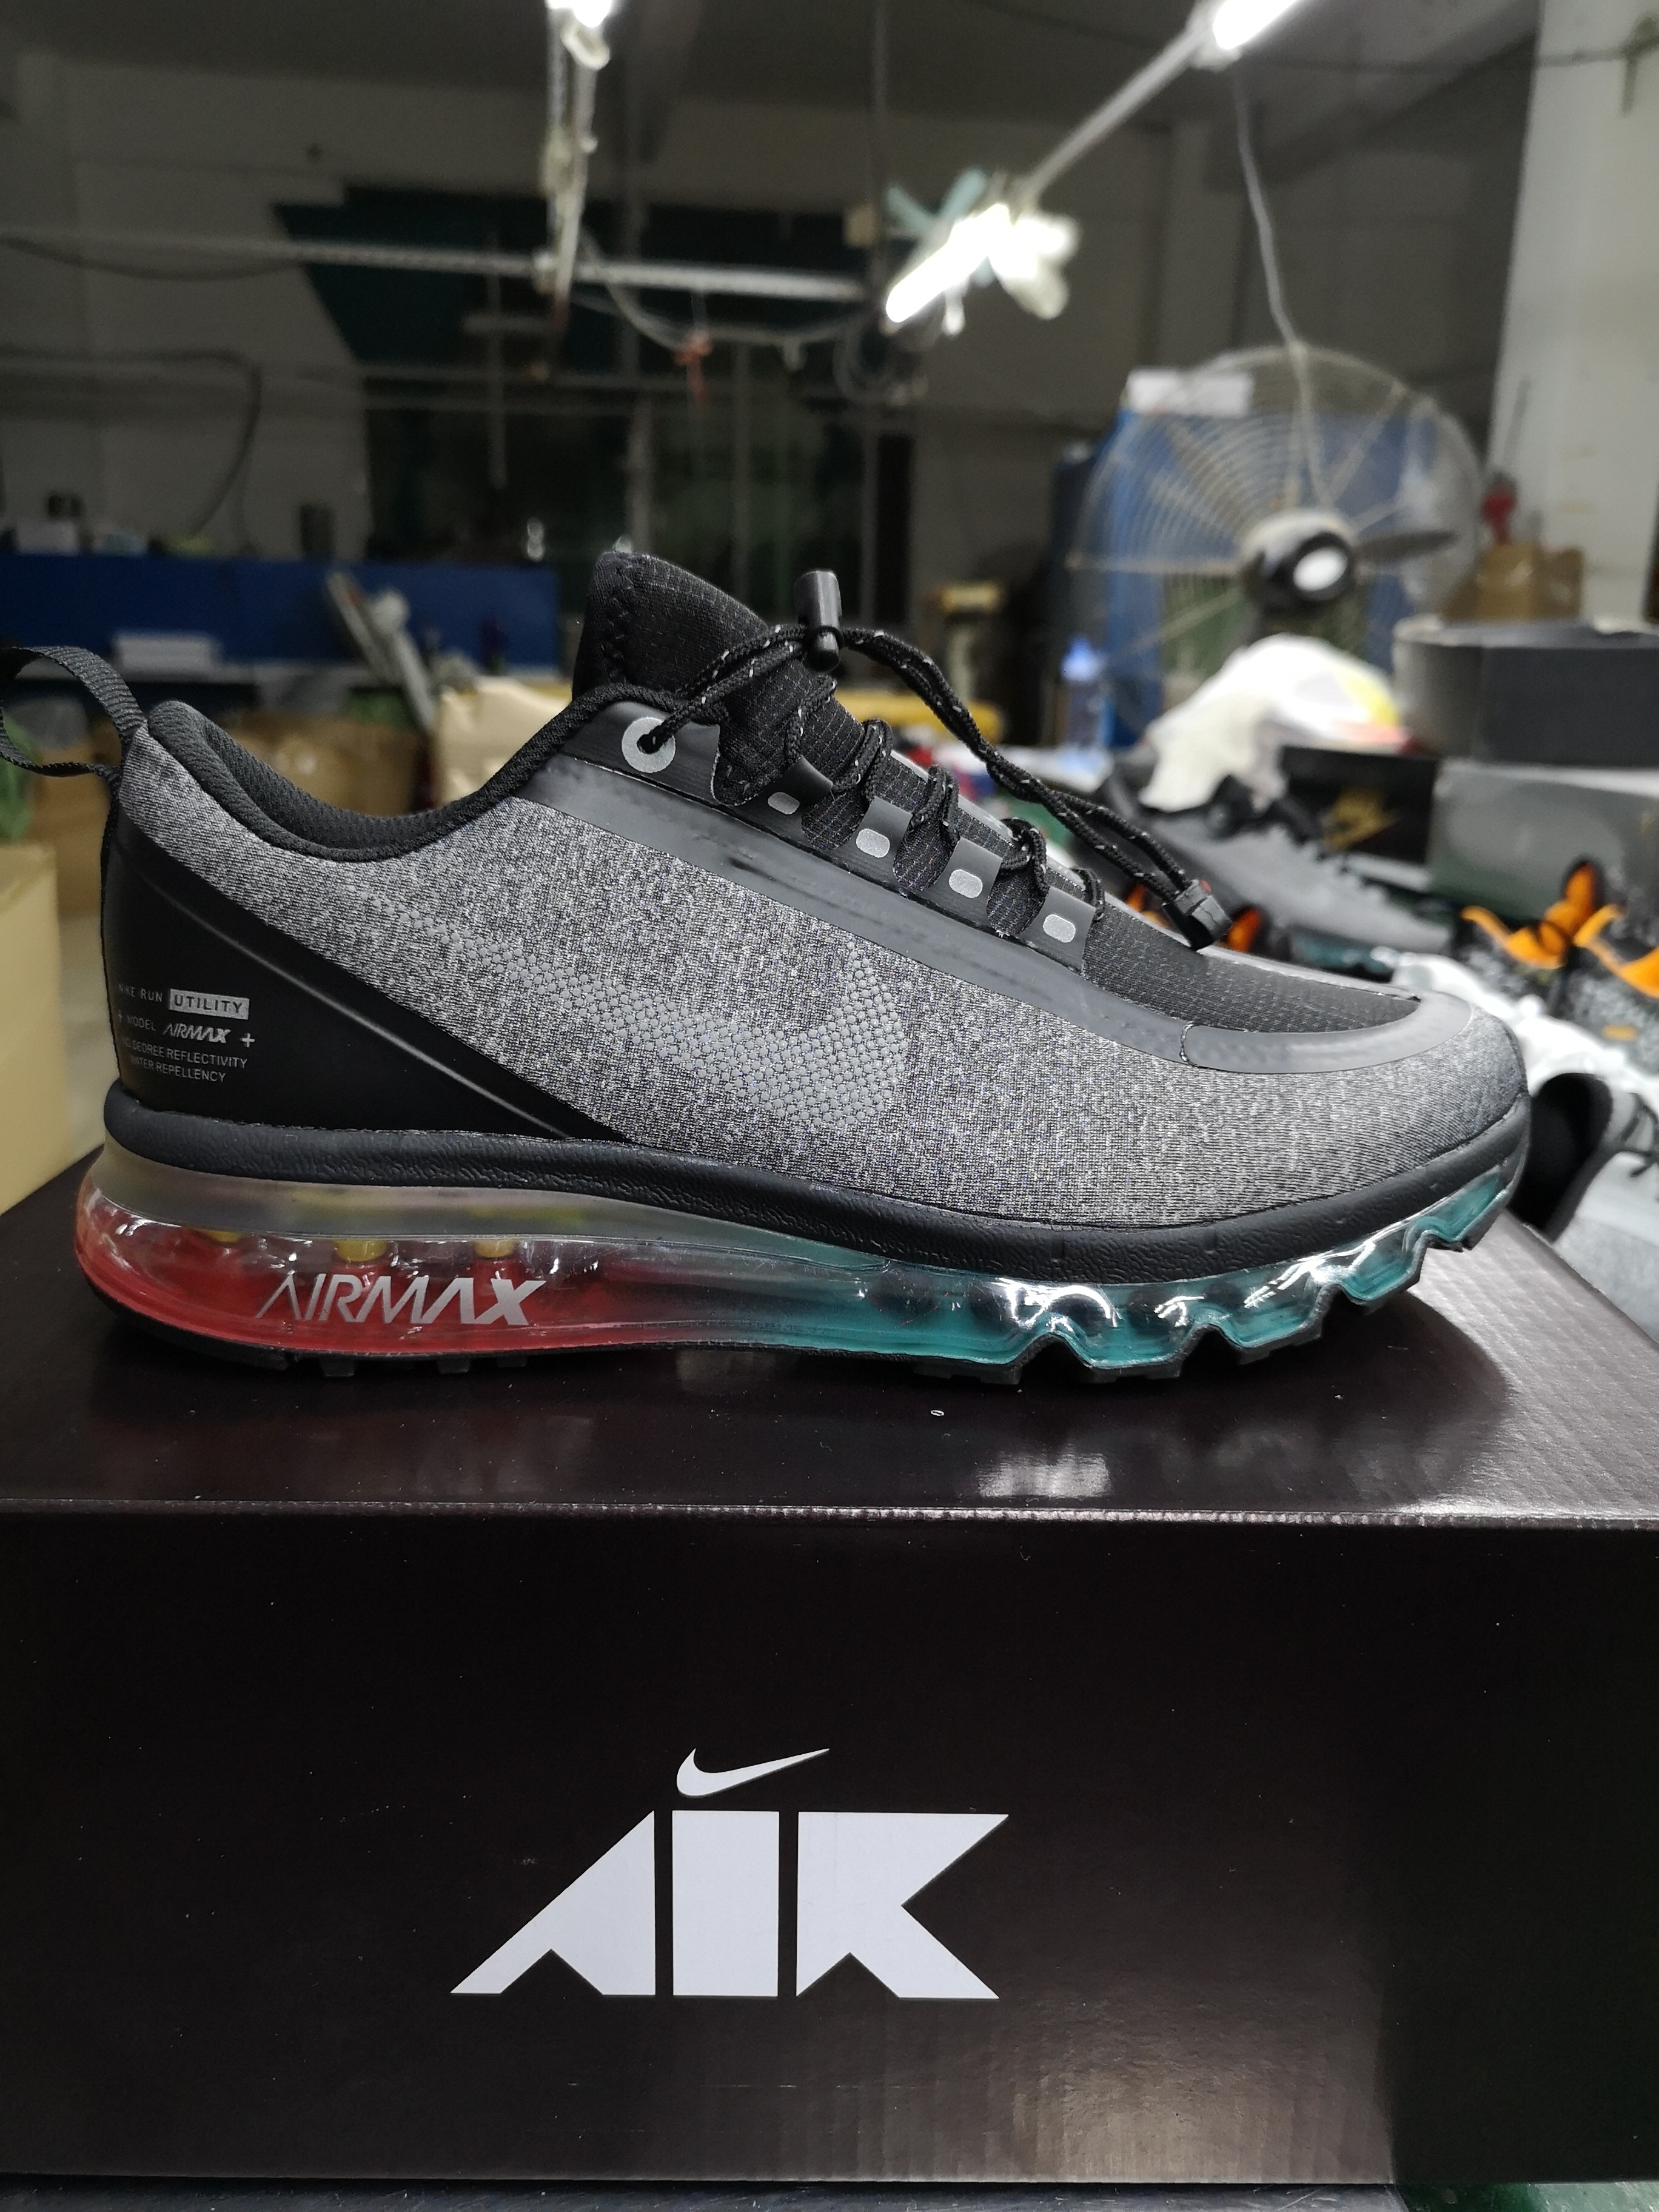 Nike Air Max 2017 Waterproof Grey Black Blue Red Shoes - Click Image to Close